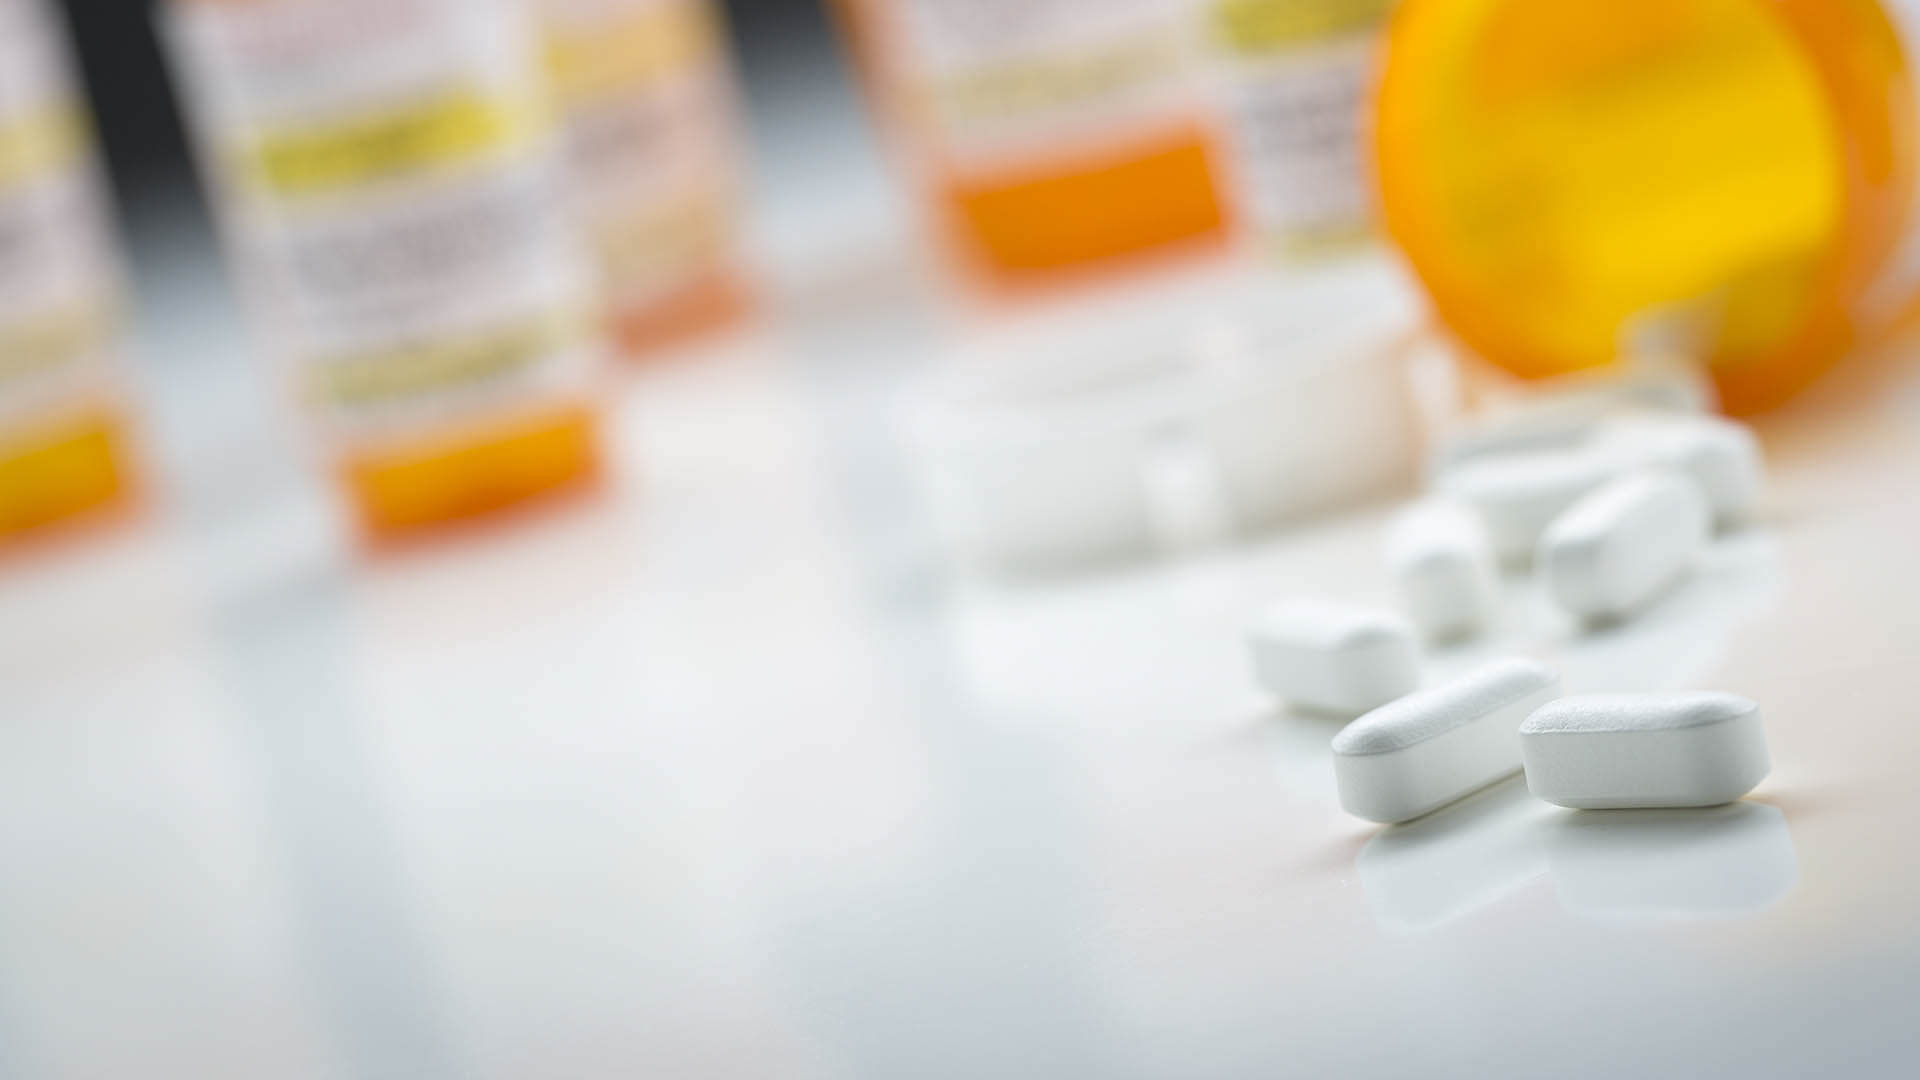 Pills and medication related to a medical malpractice case